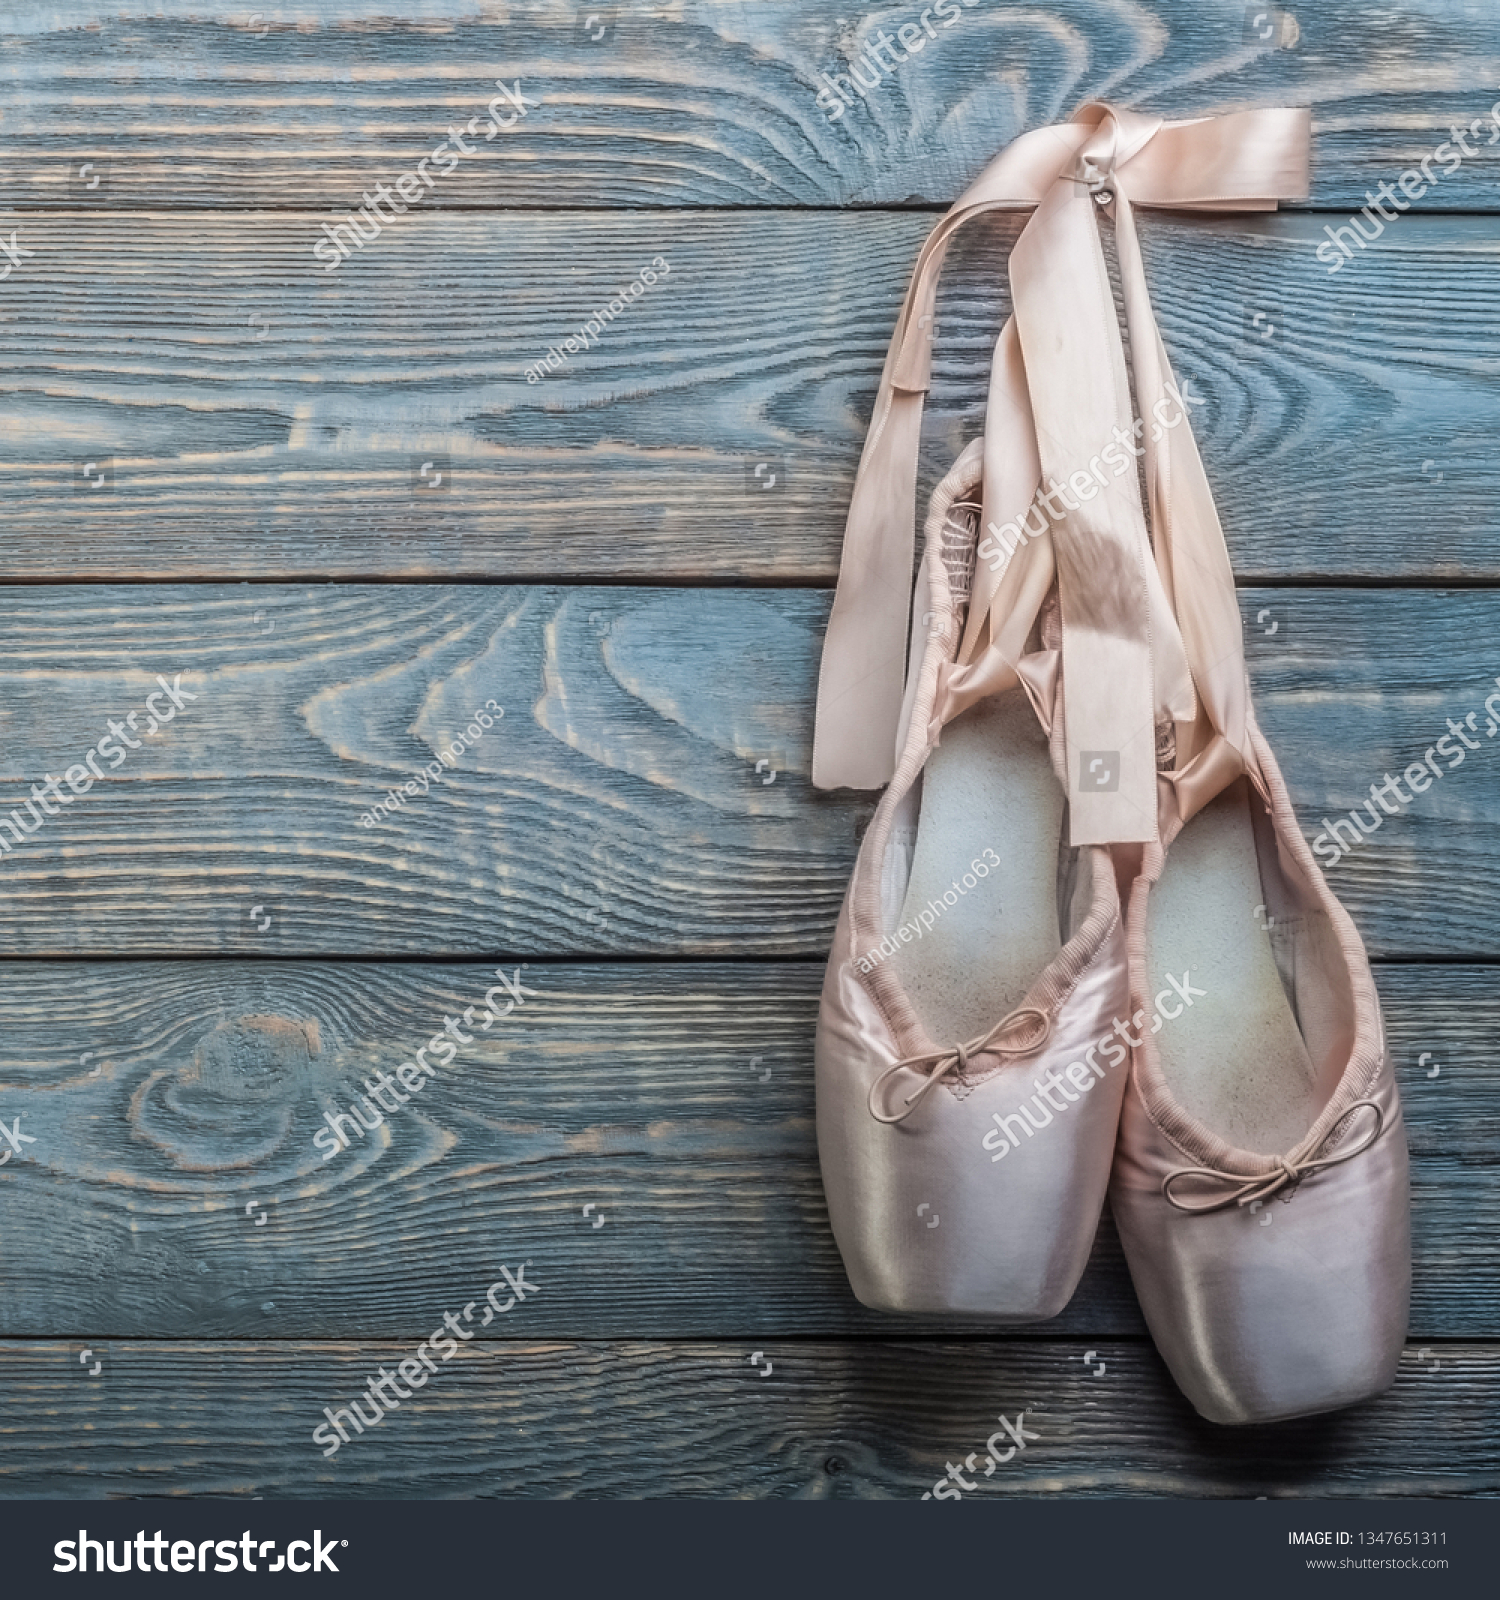 turquoise ballet pointe shoes